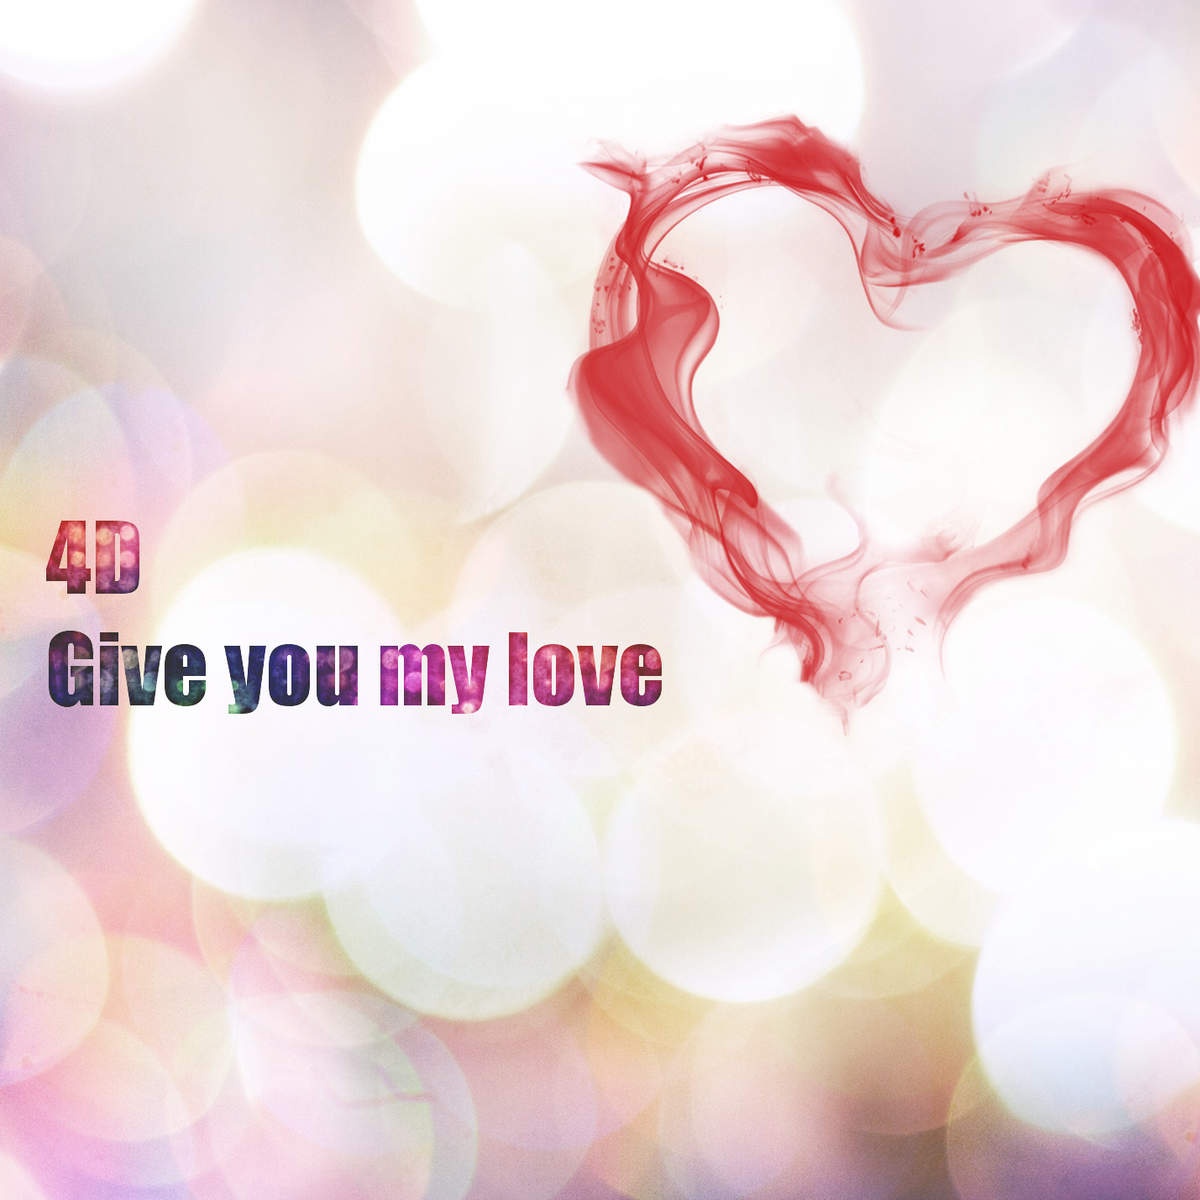 Give you my love